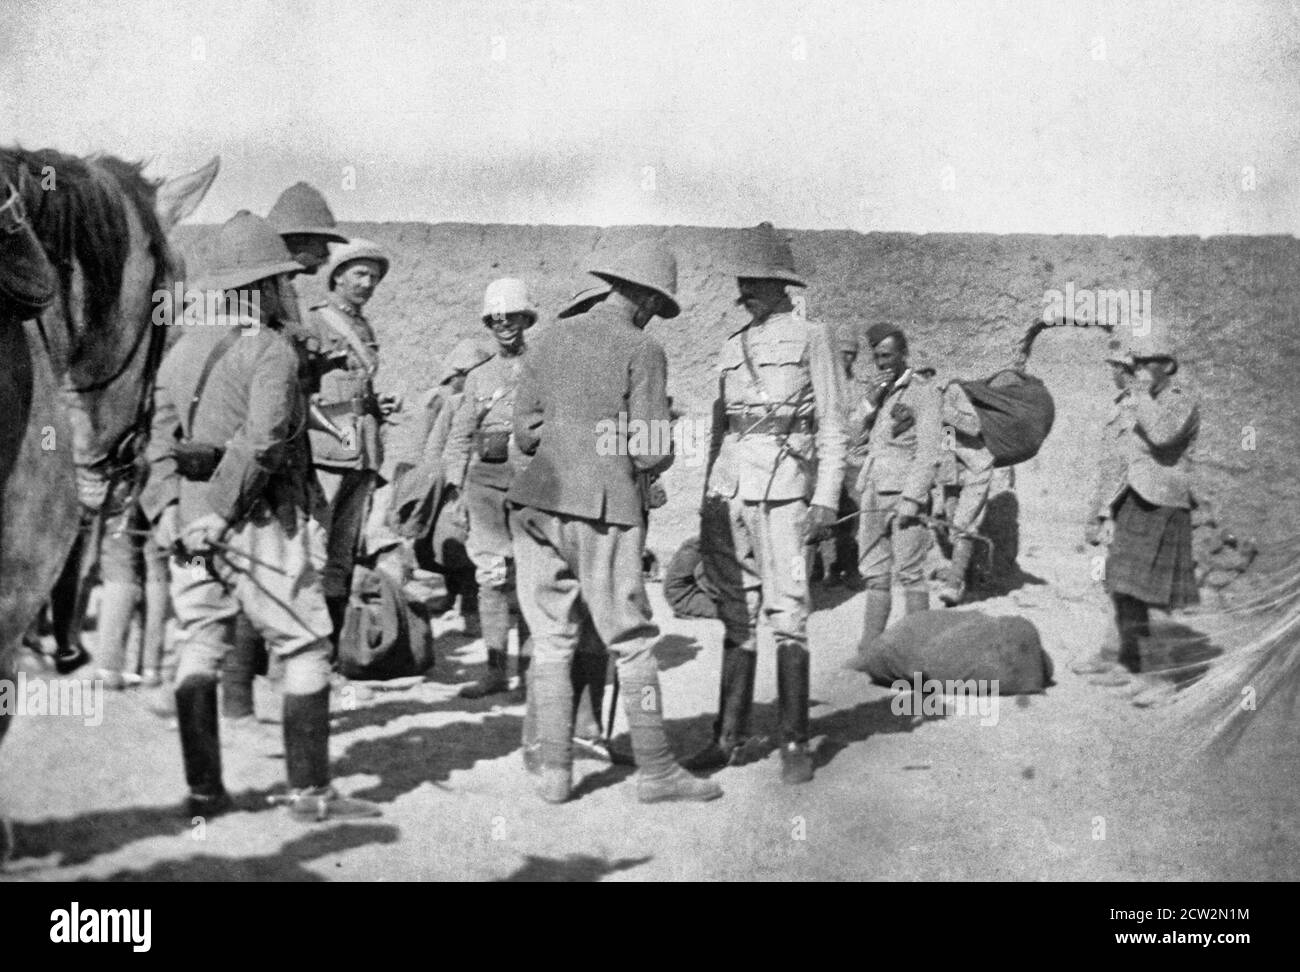 General Kitchener and the Anglo-egyptian Nile Campaign, 1898 - General Kitchener, Sirdar (Commander) of the Egyptian Army (centre right) in discussion with the Commander of the British Brigade on the Nile, Major General Sir William Gatacre. 1898 Stock Photo